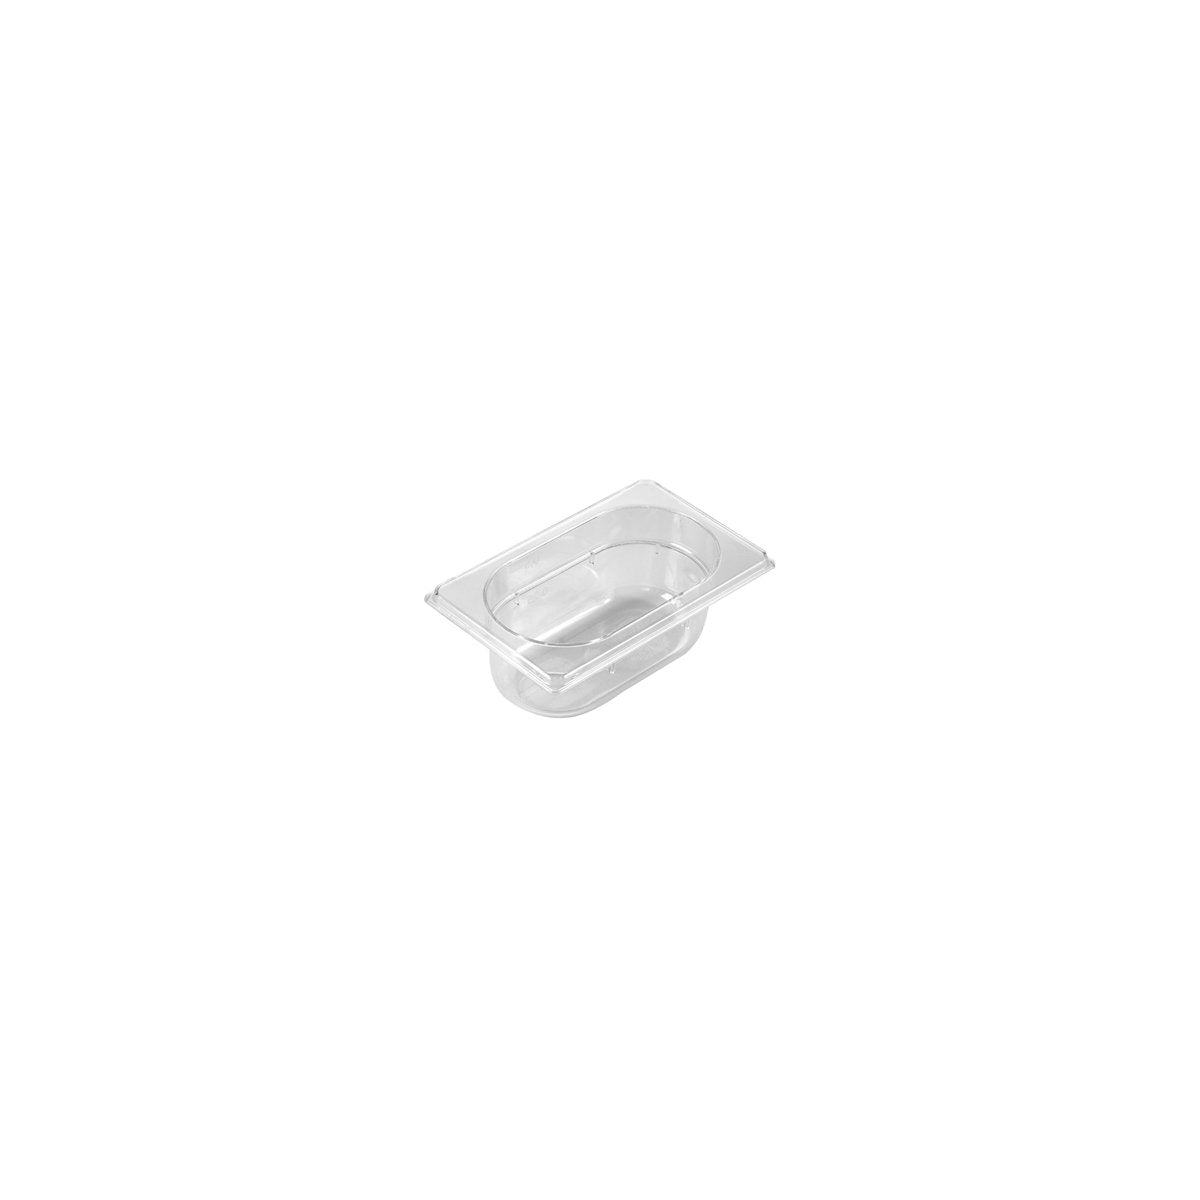 PC-19065CL Inox Macel Gastronorm Pan Polycarbonate onate Clear 1/9 Size 65mm Tomkin Australia Hospitality Supplies